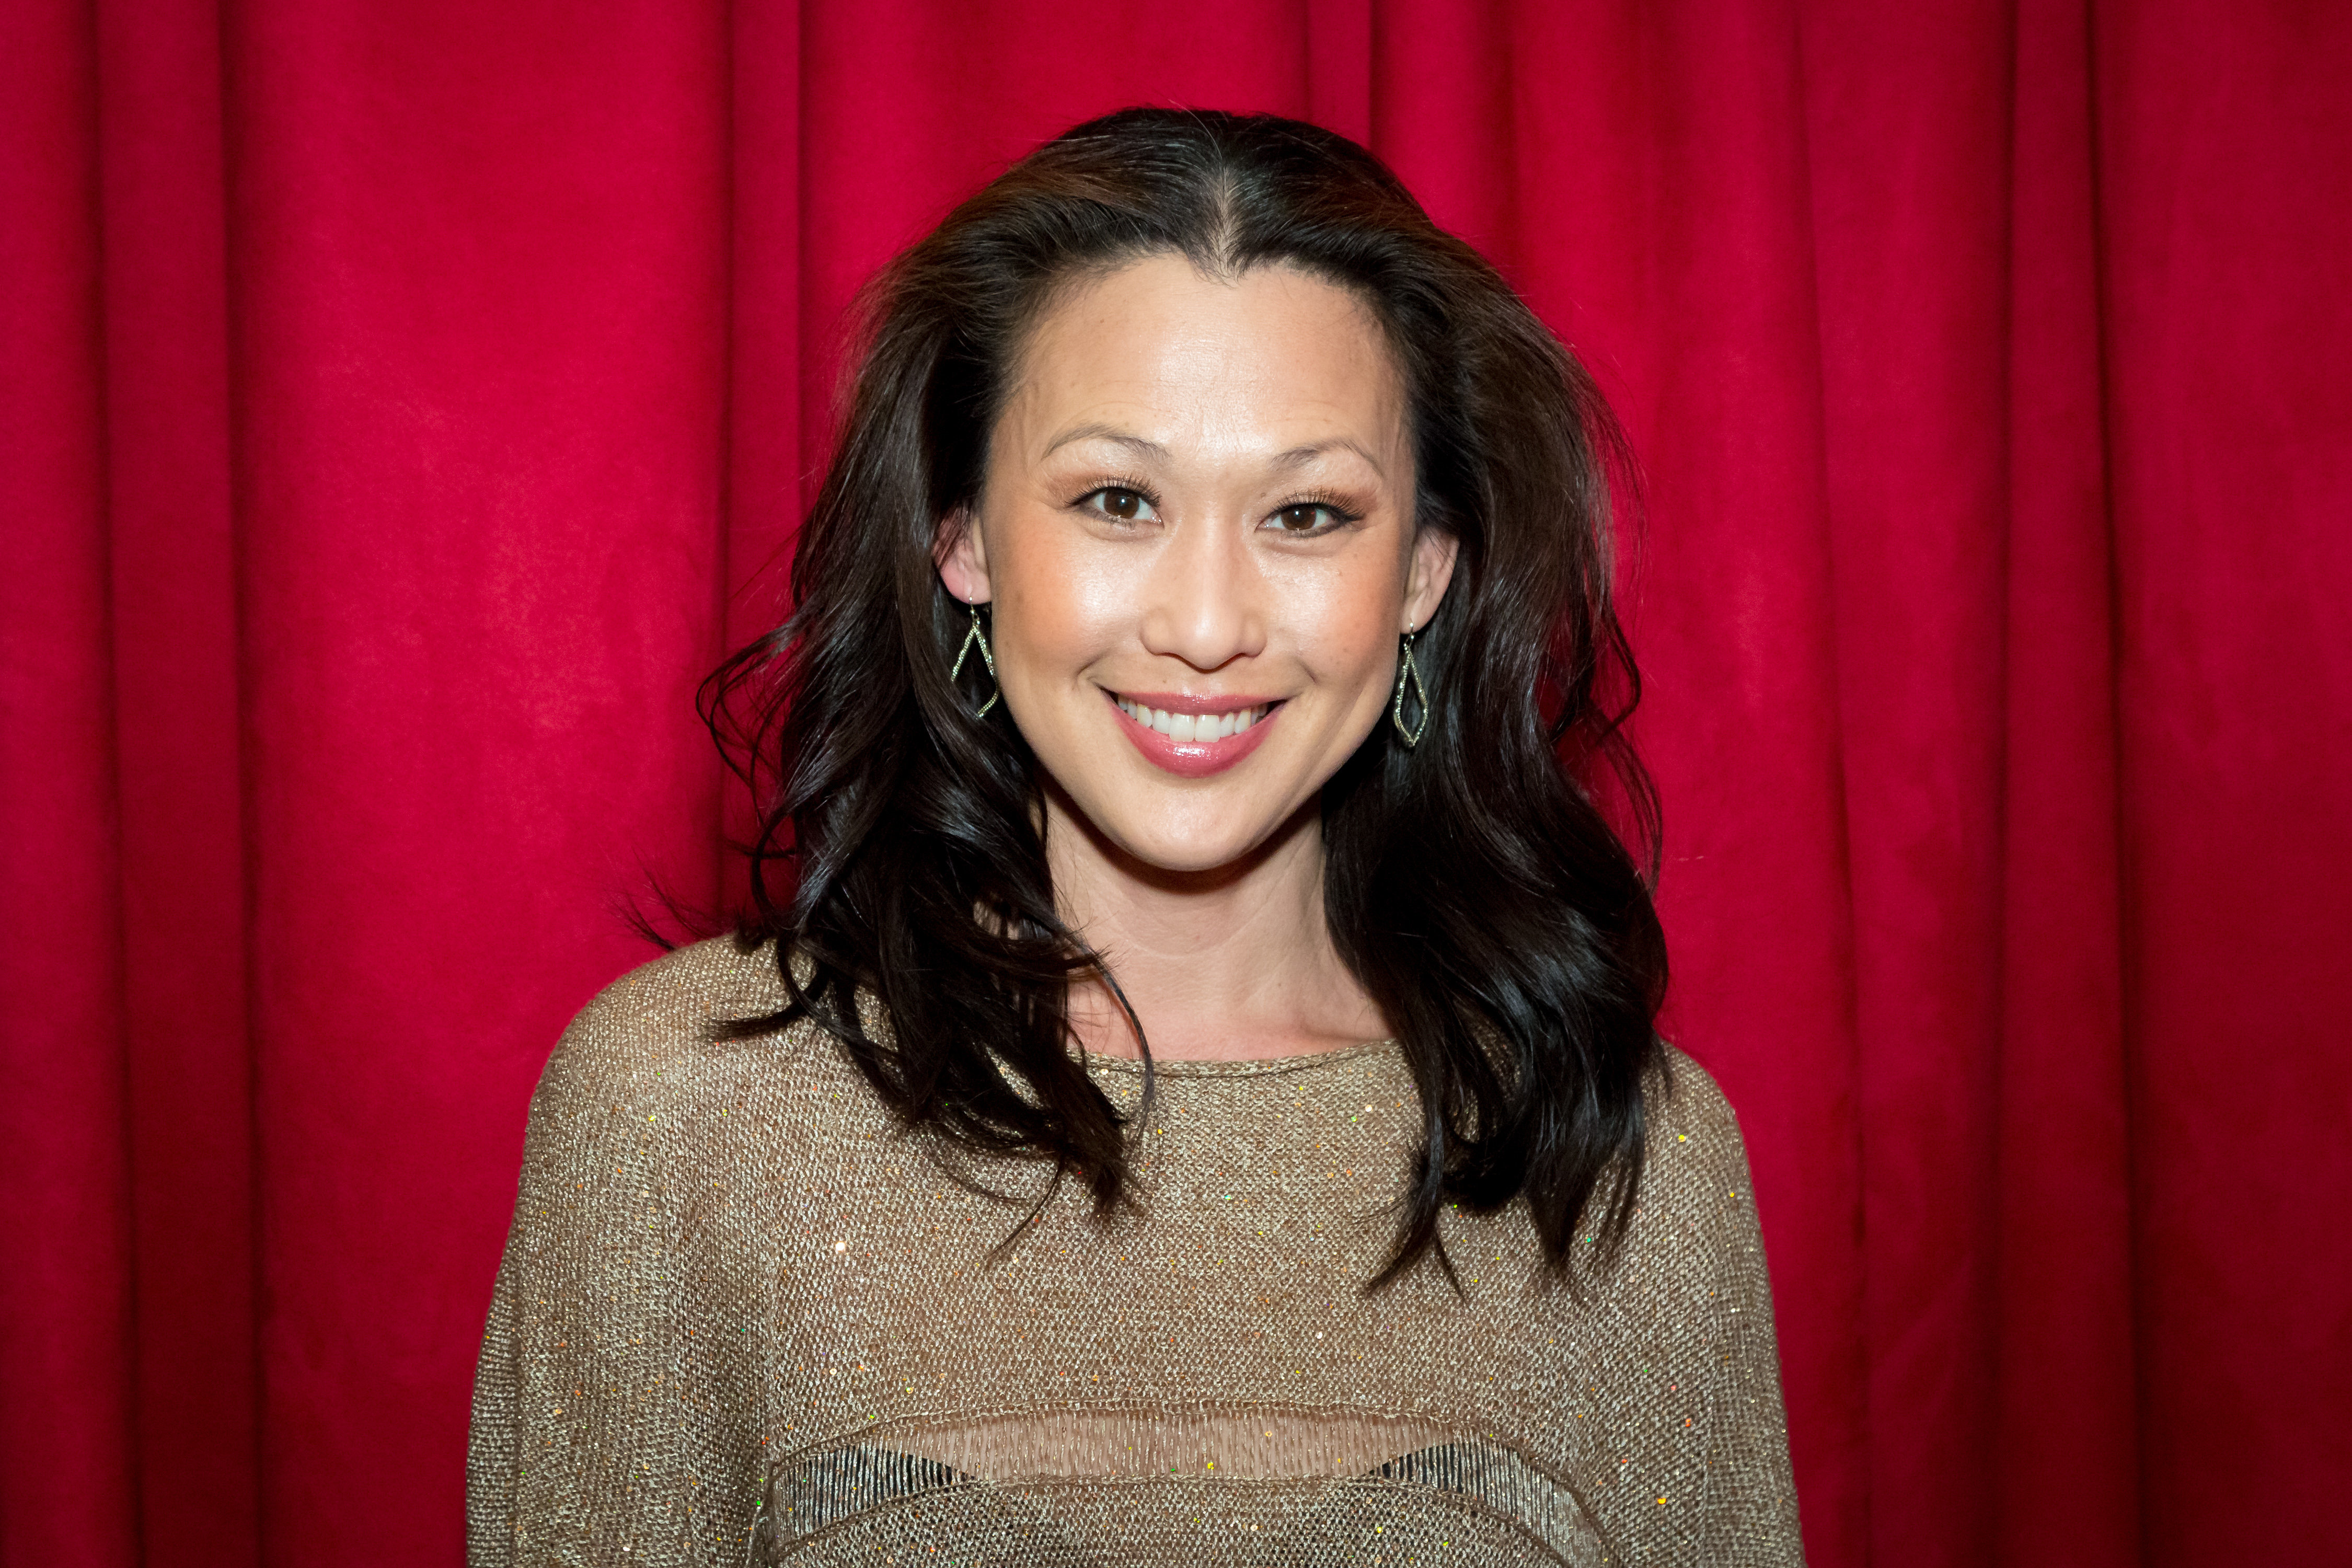 Nicole Bilderback, The Asian Friend Of 90s Teen Comedies, Is Ready To Kick Your Ass HuffPost Entertainment